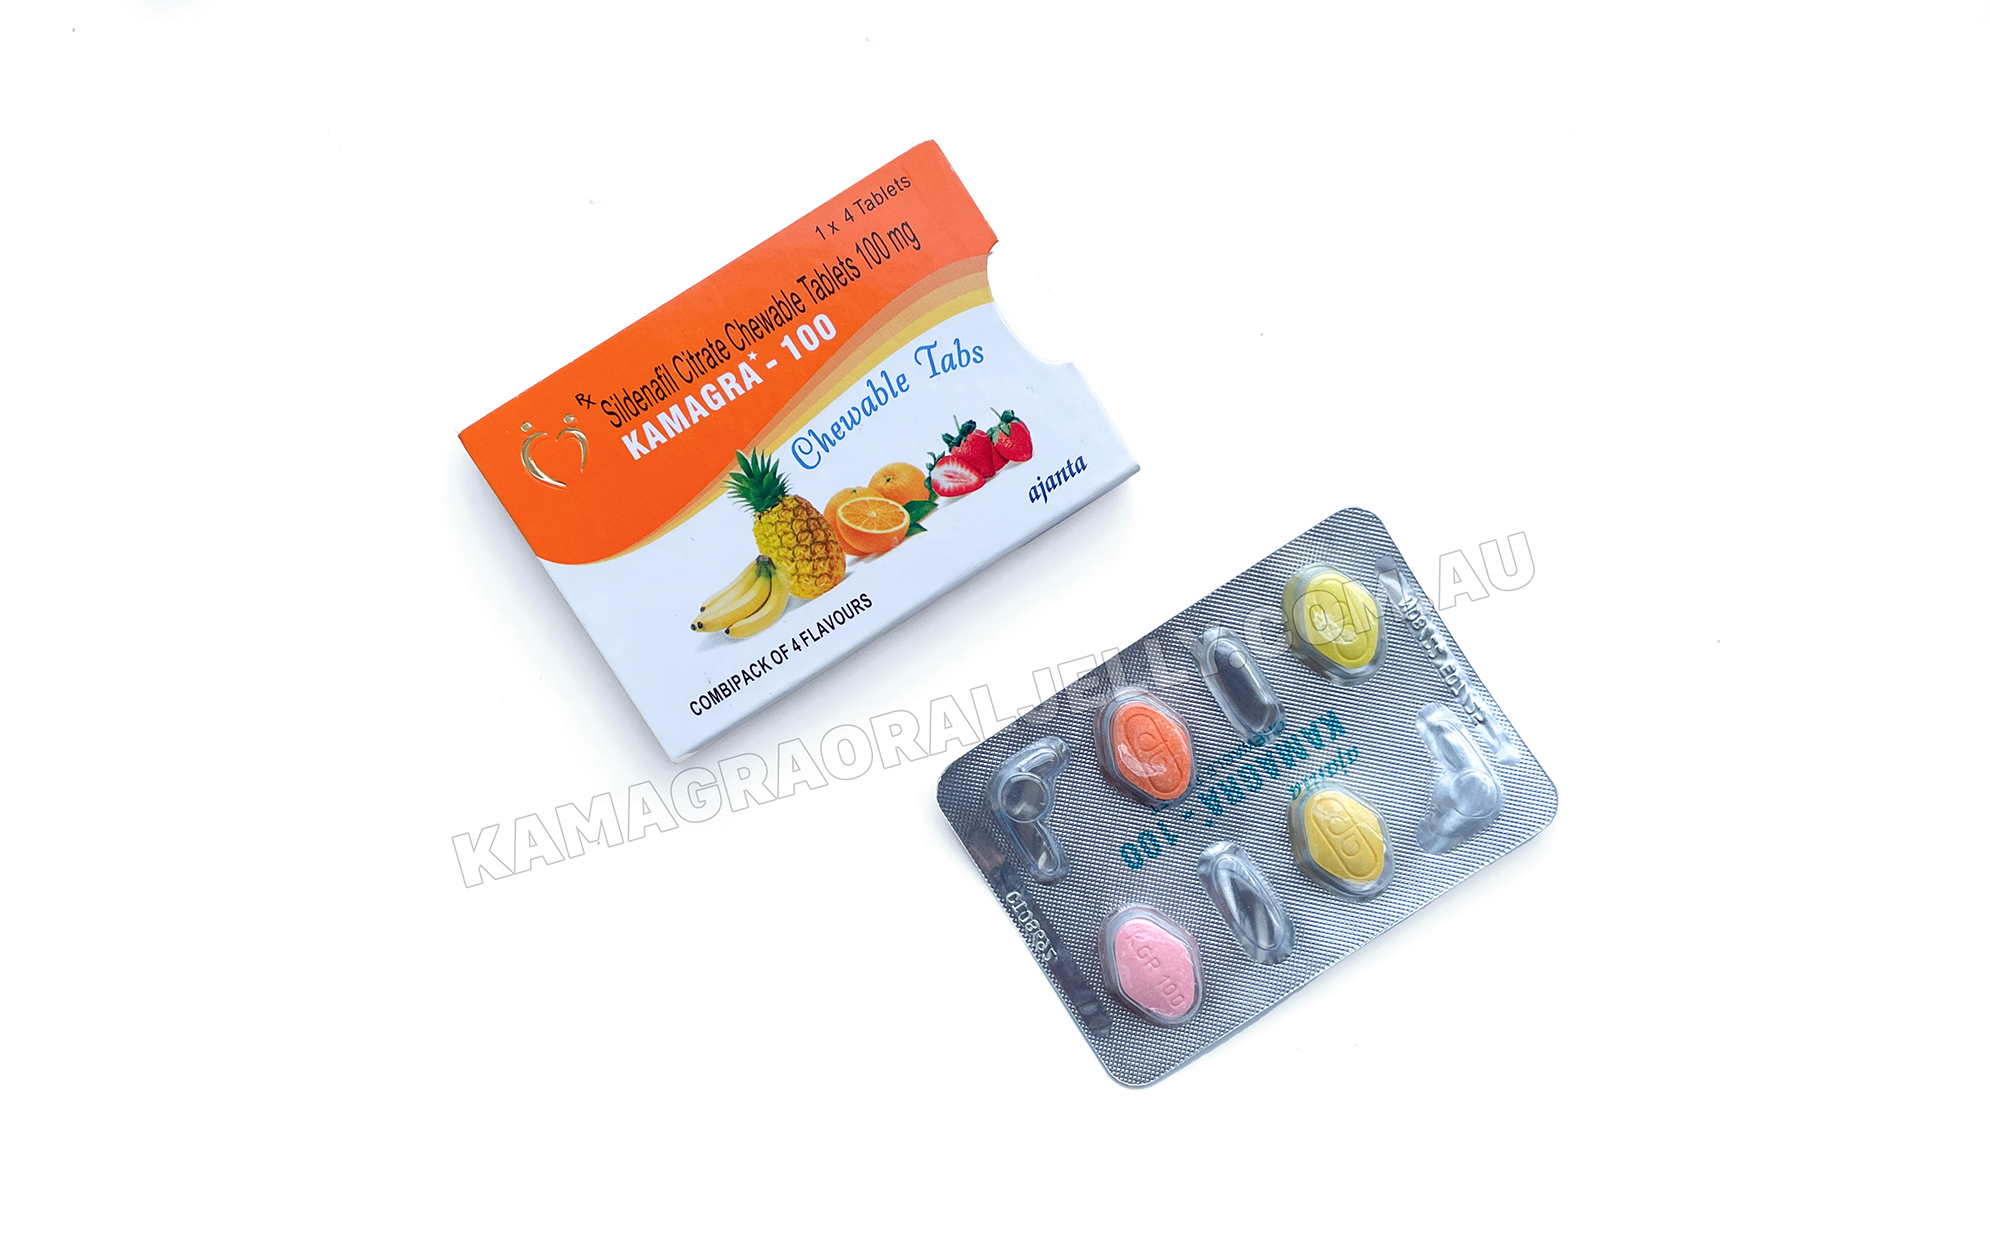 Benefits and Key Features of Kamagra Soft Chewable Tablets 